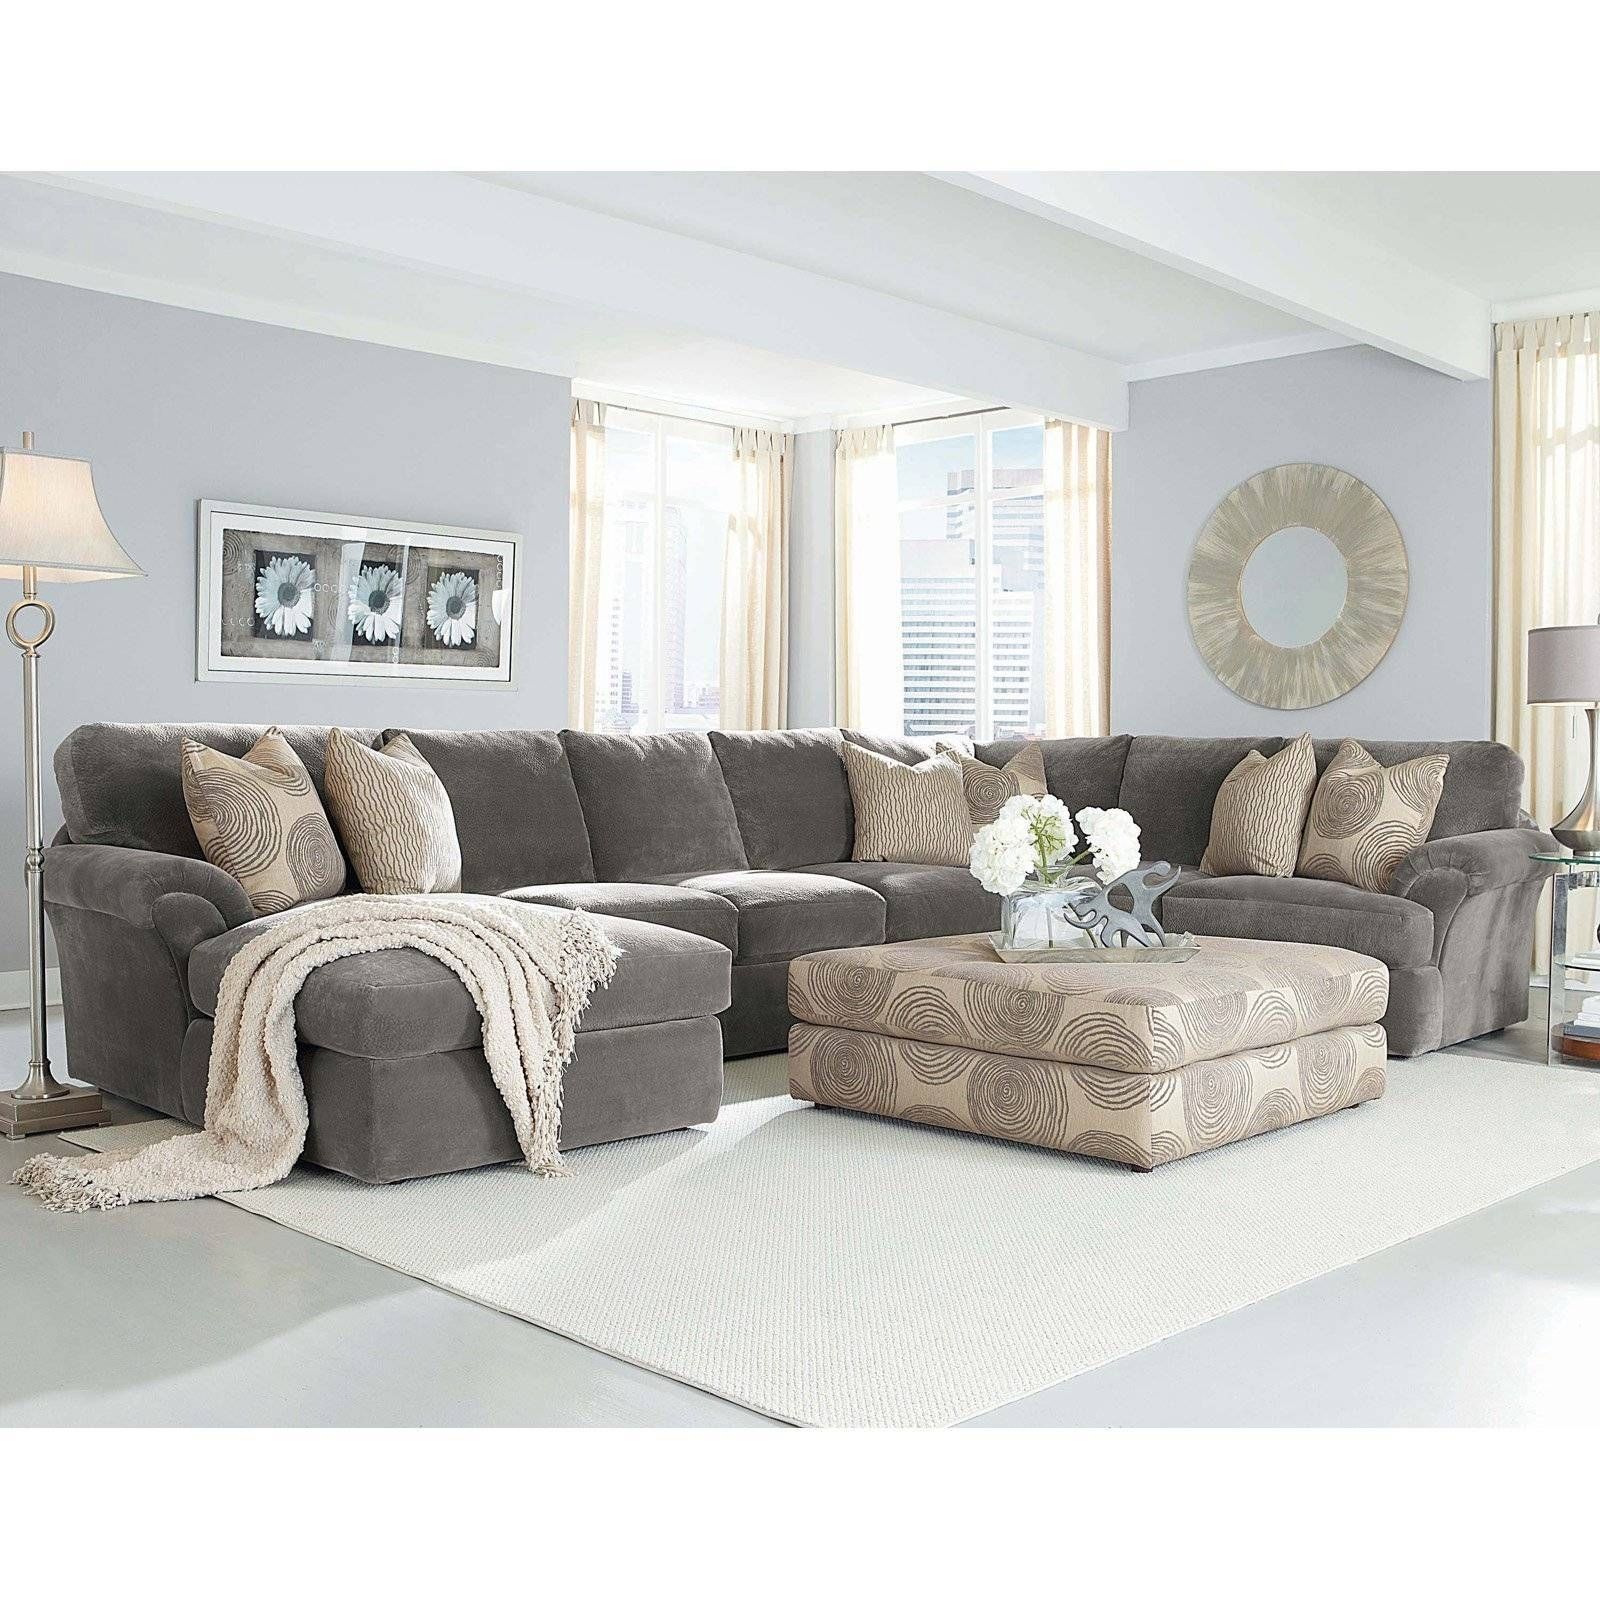 41+ Incredible Photos Of Grey Sectional Living Room Ideas Ideas Throughout Dark Grey Polyester Sofa Couches (View 11 of 20)